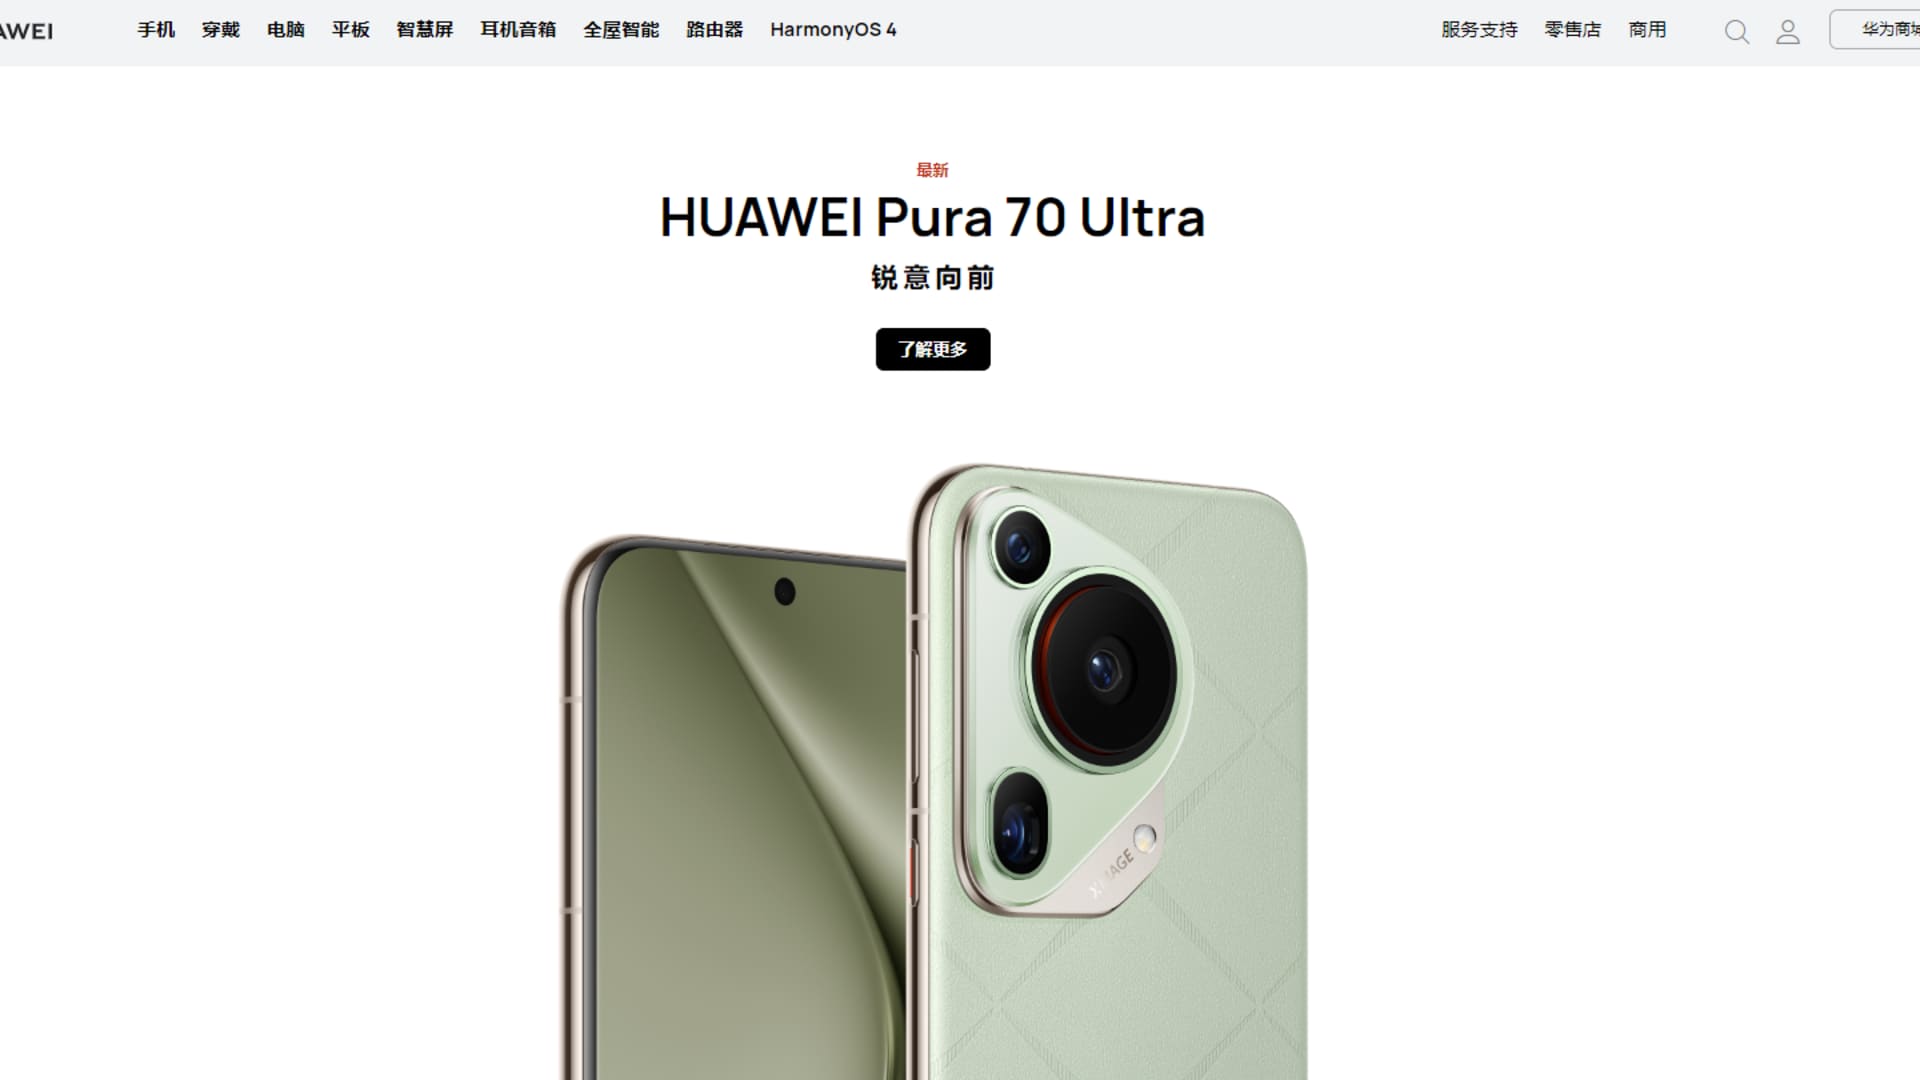 Huawei launches Pura 70 smartphone to compete with Apple in China